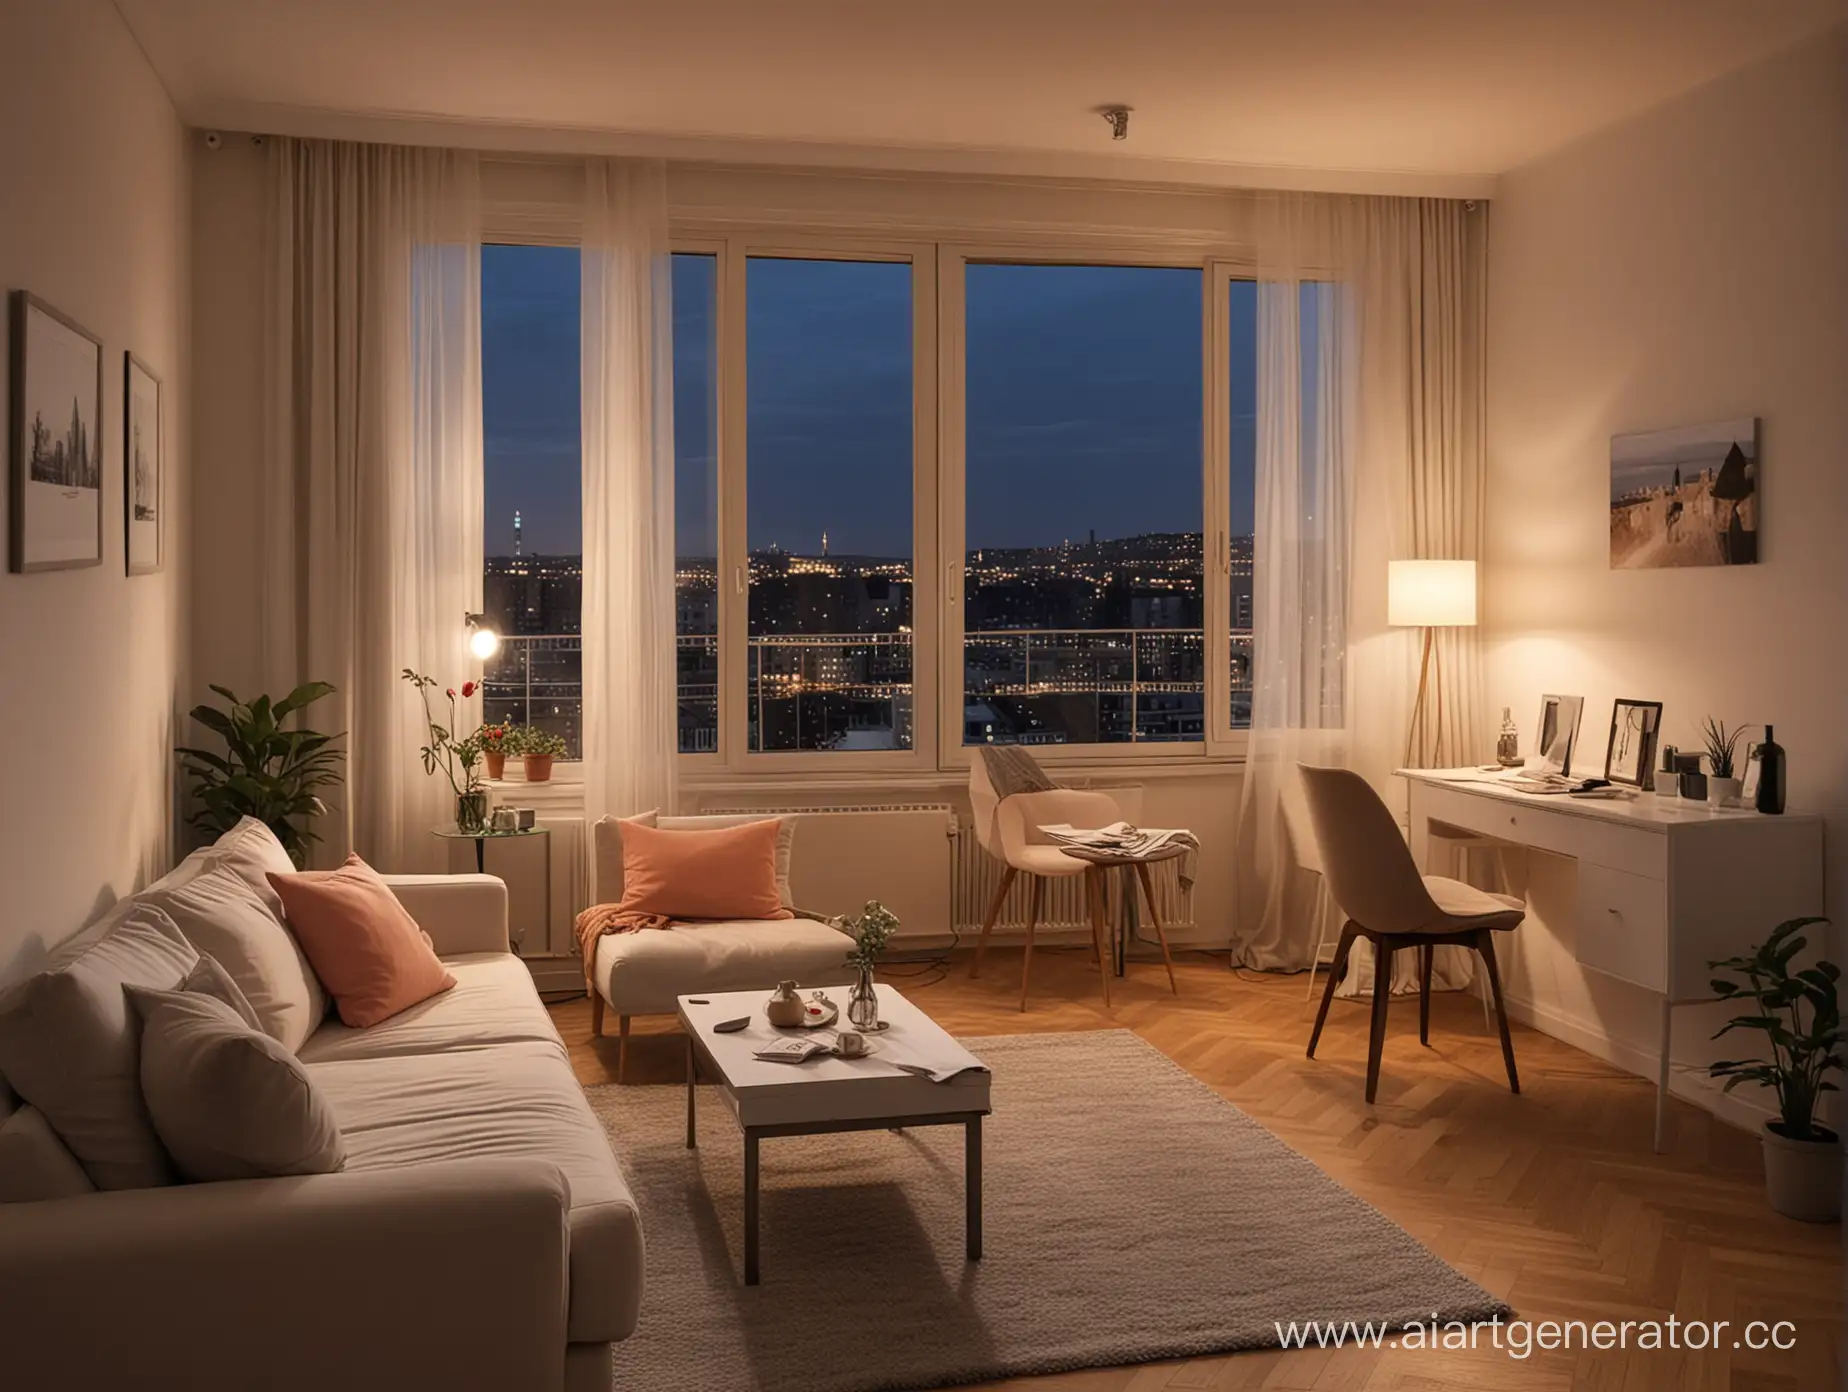 Romantic-Evening-in-a-Cozy-Apartment-with-City-View